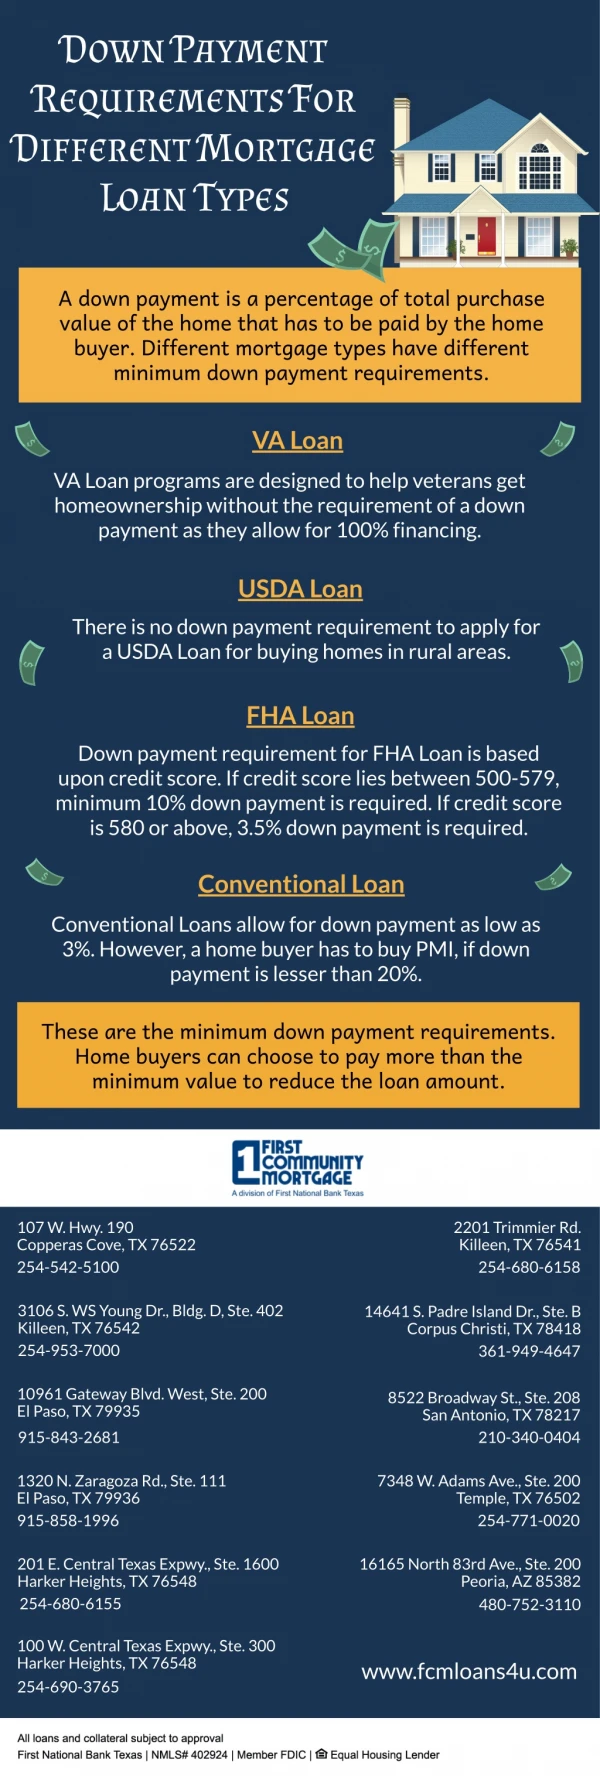 Down Payment Requirements For Different Mortgage Loan Types